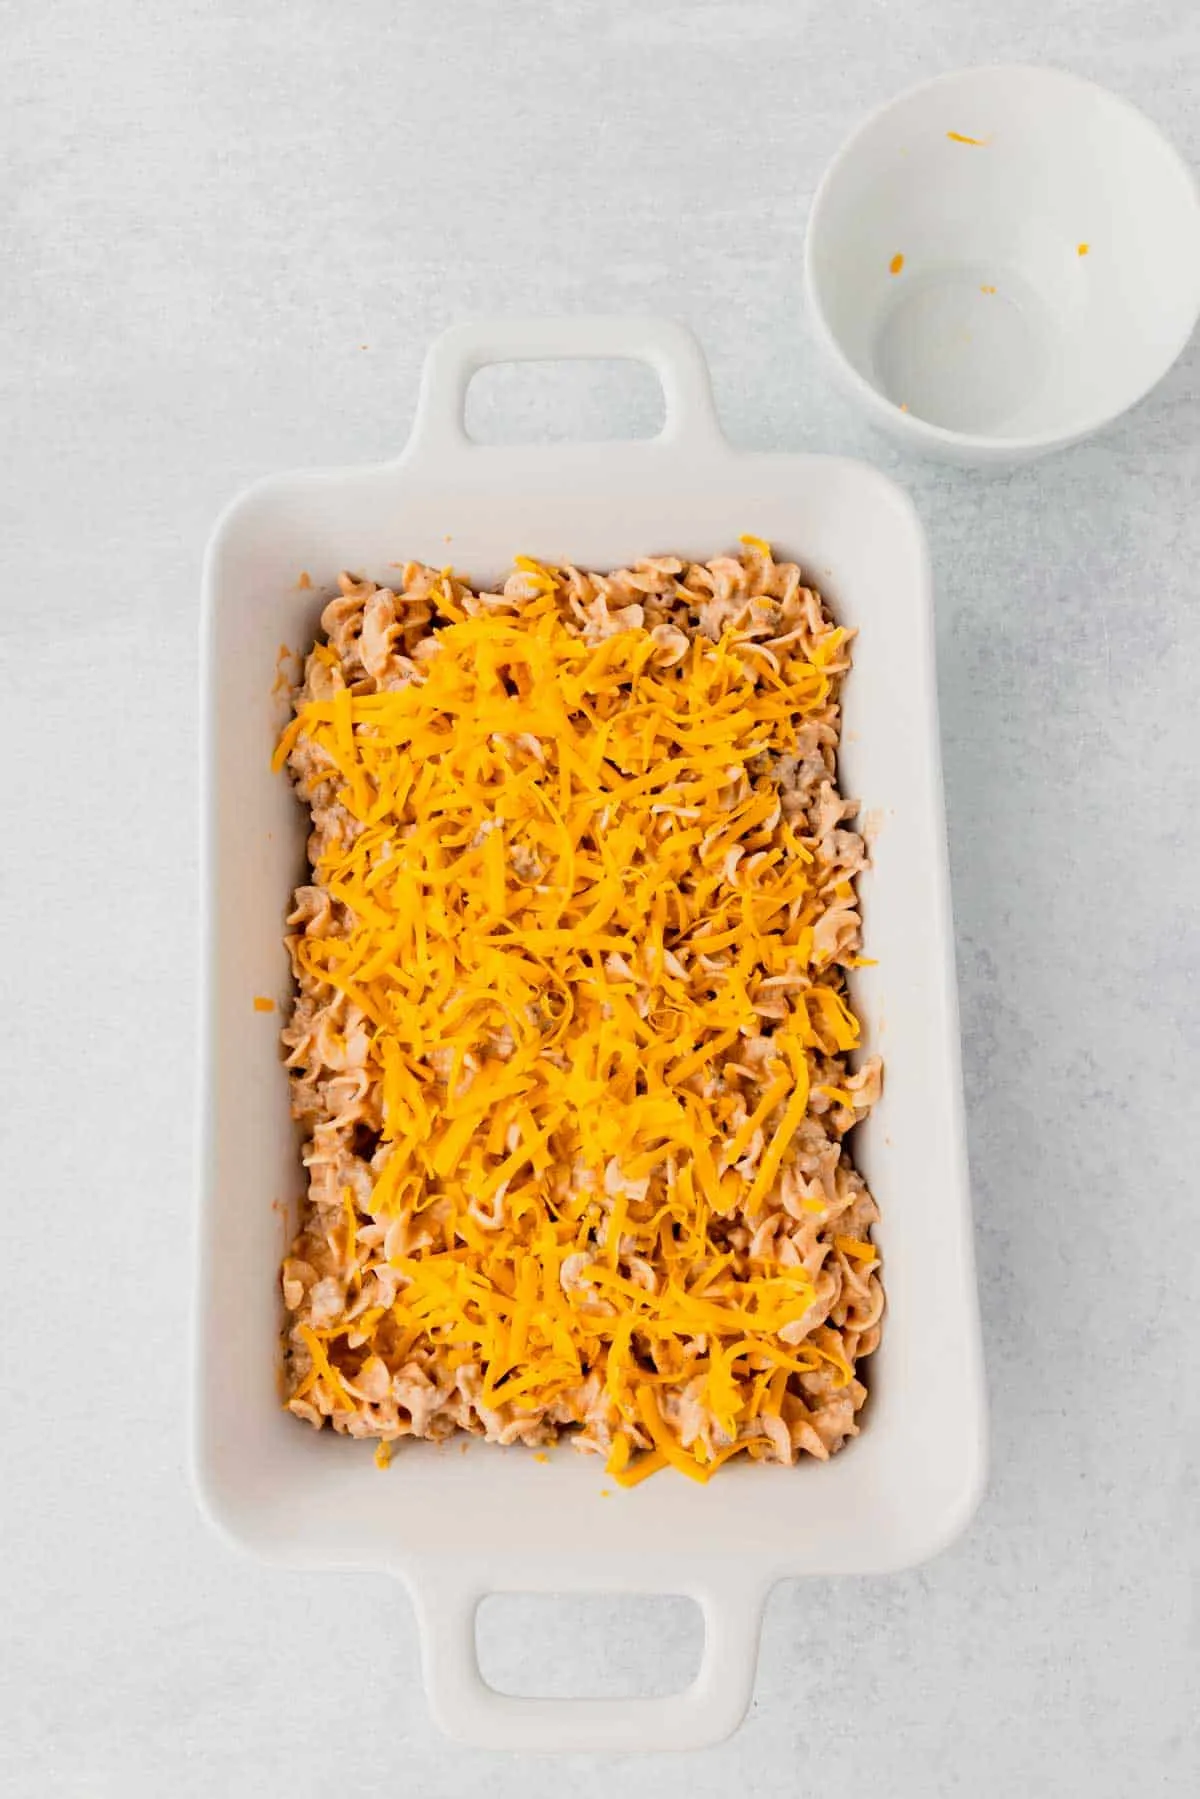 shredded cheddar cheese on top of beef noodle mixture in a casserole dish